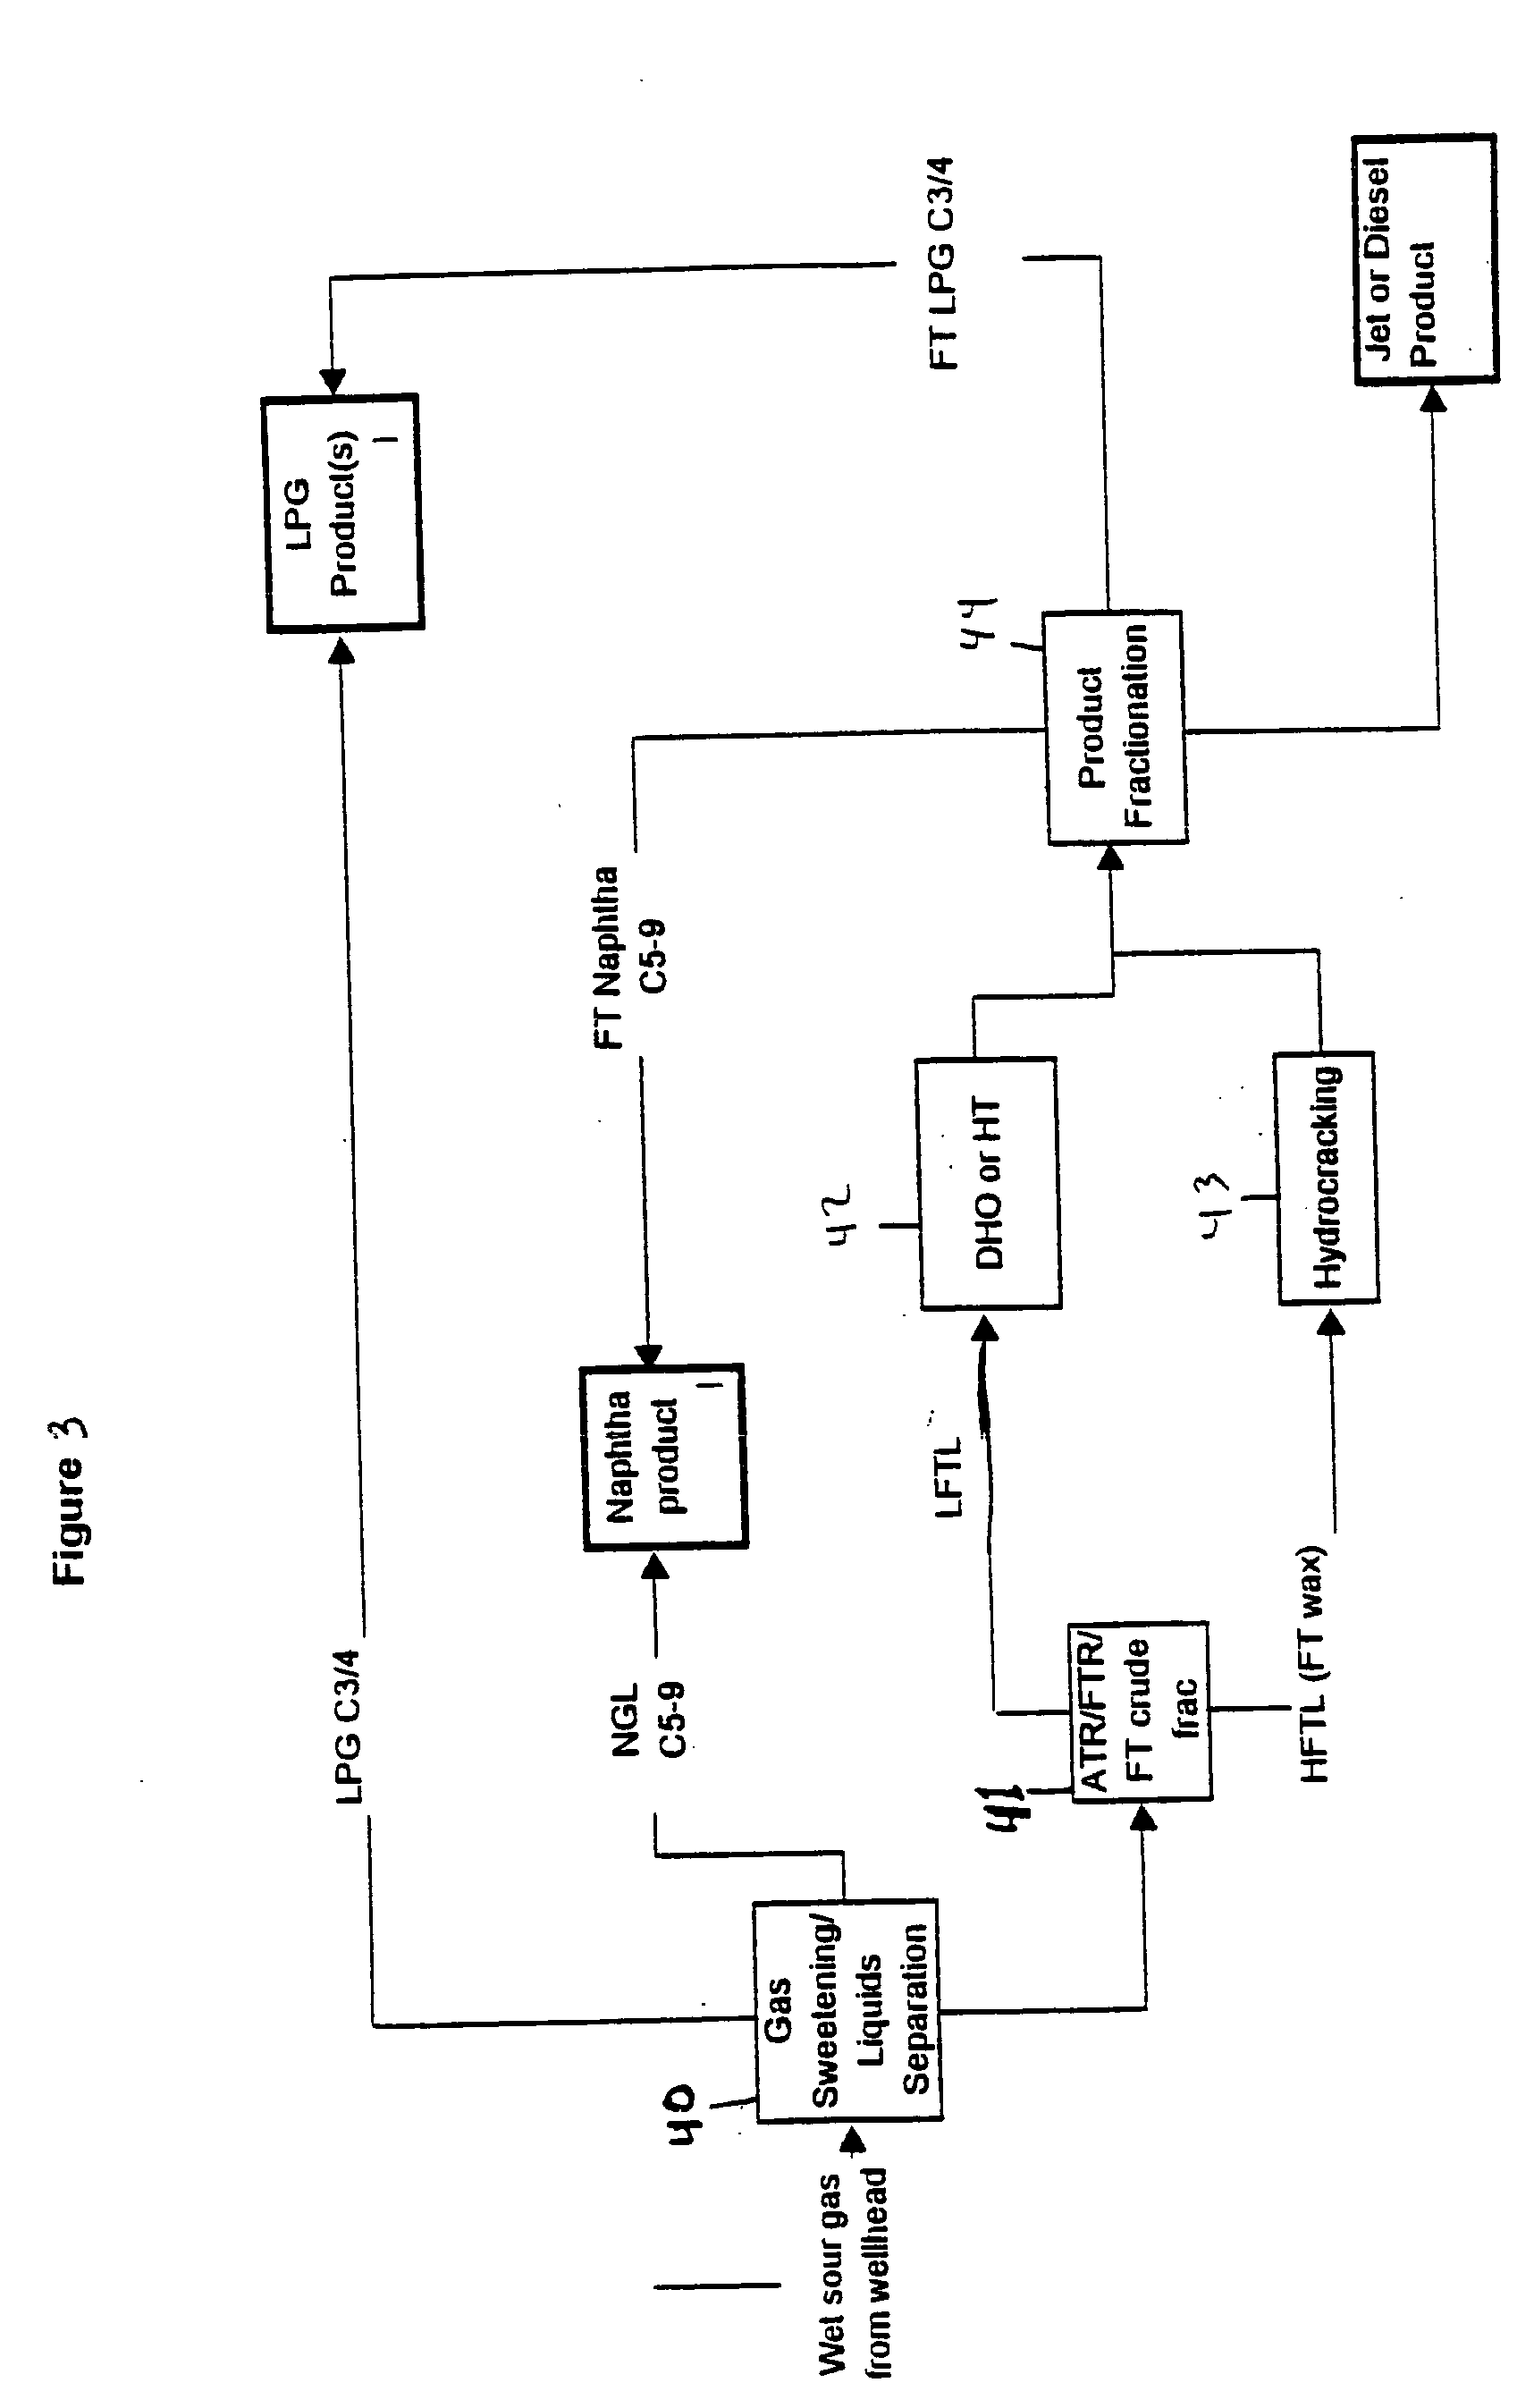 Movable gas-to-liquid system and process